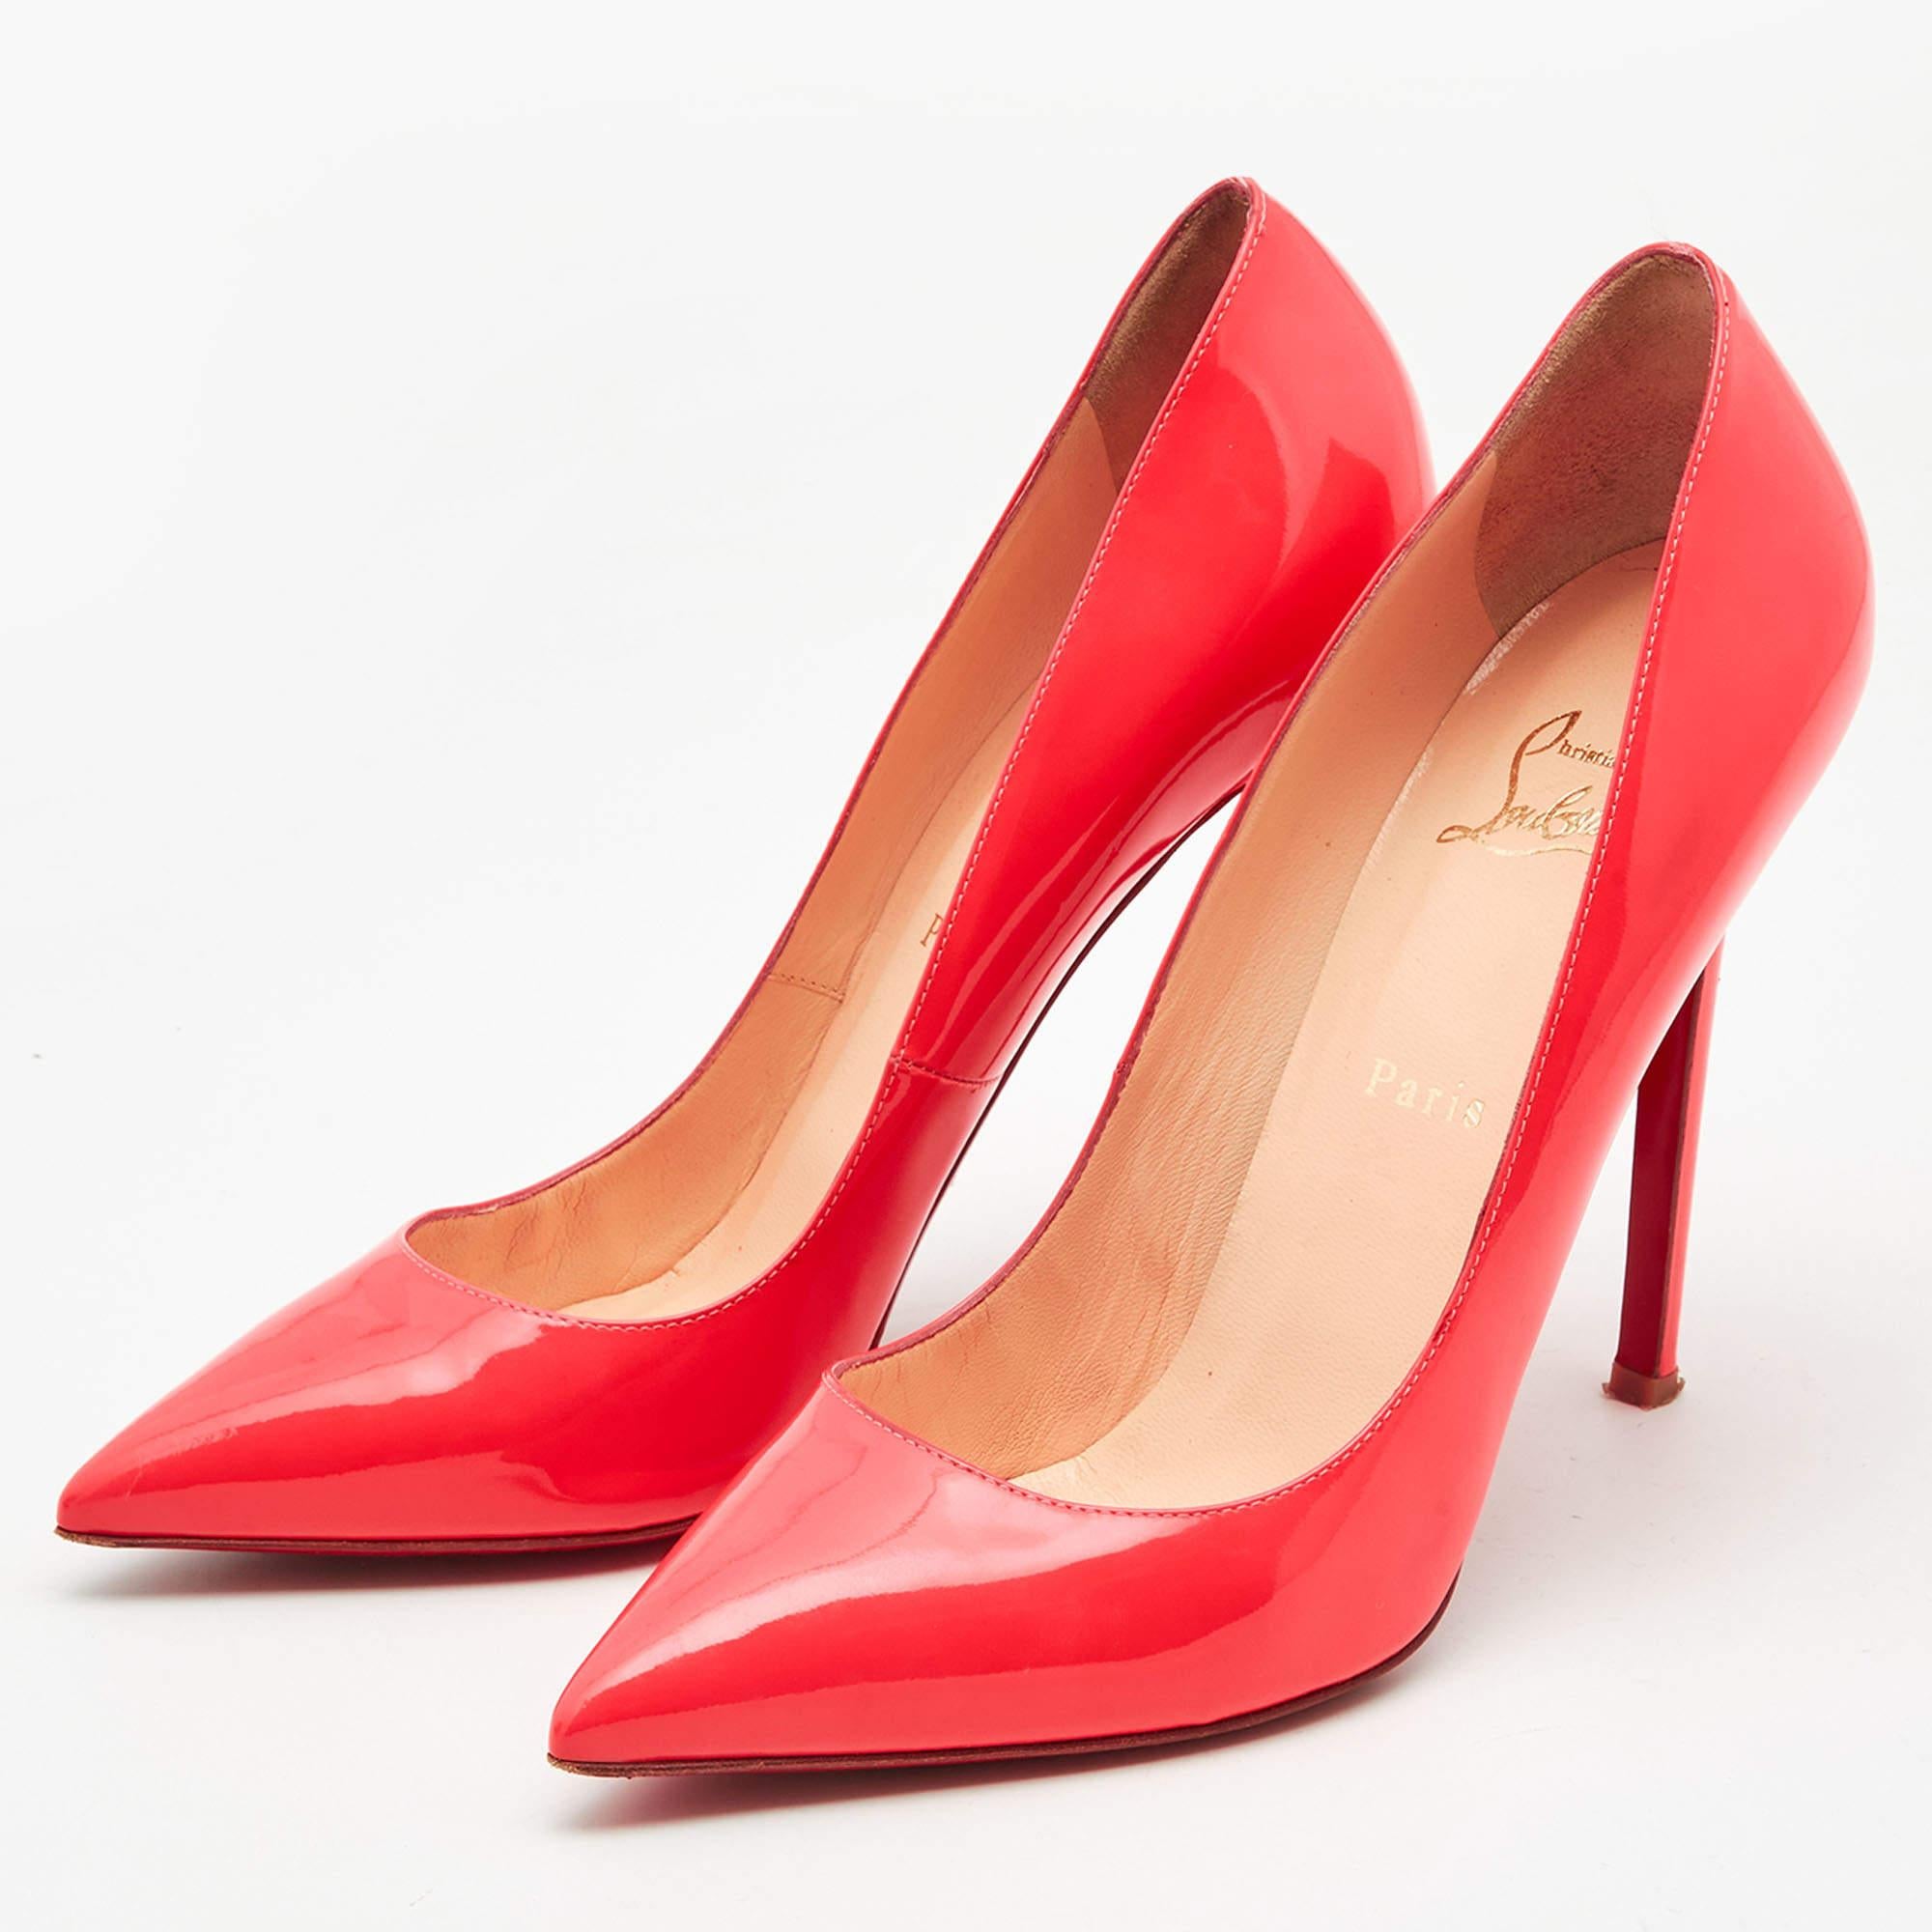 Christian Louboutin Neon Coral Patent So Kate Pointed Toe Pumps Size 40.5 In Good Condition For Sale In Dubai, Al Qouz 2